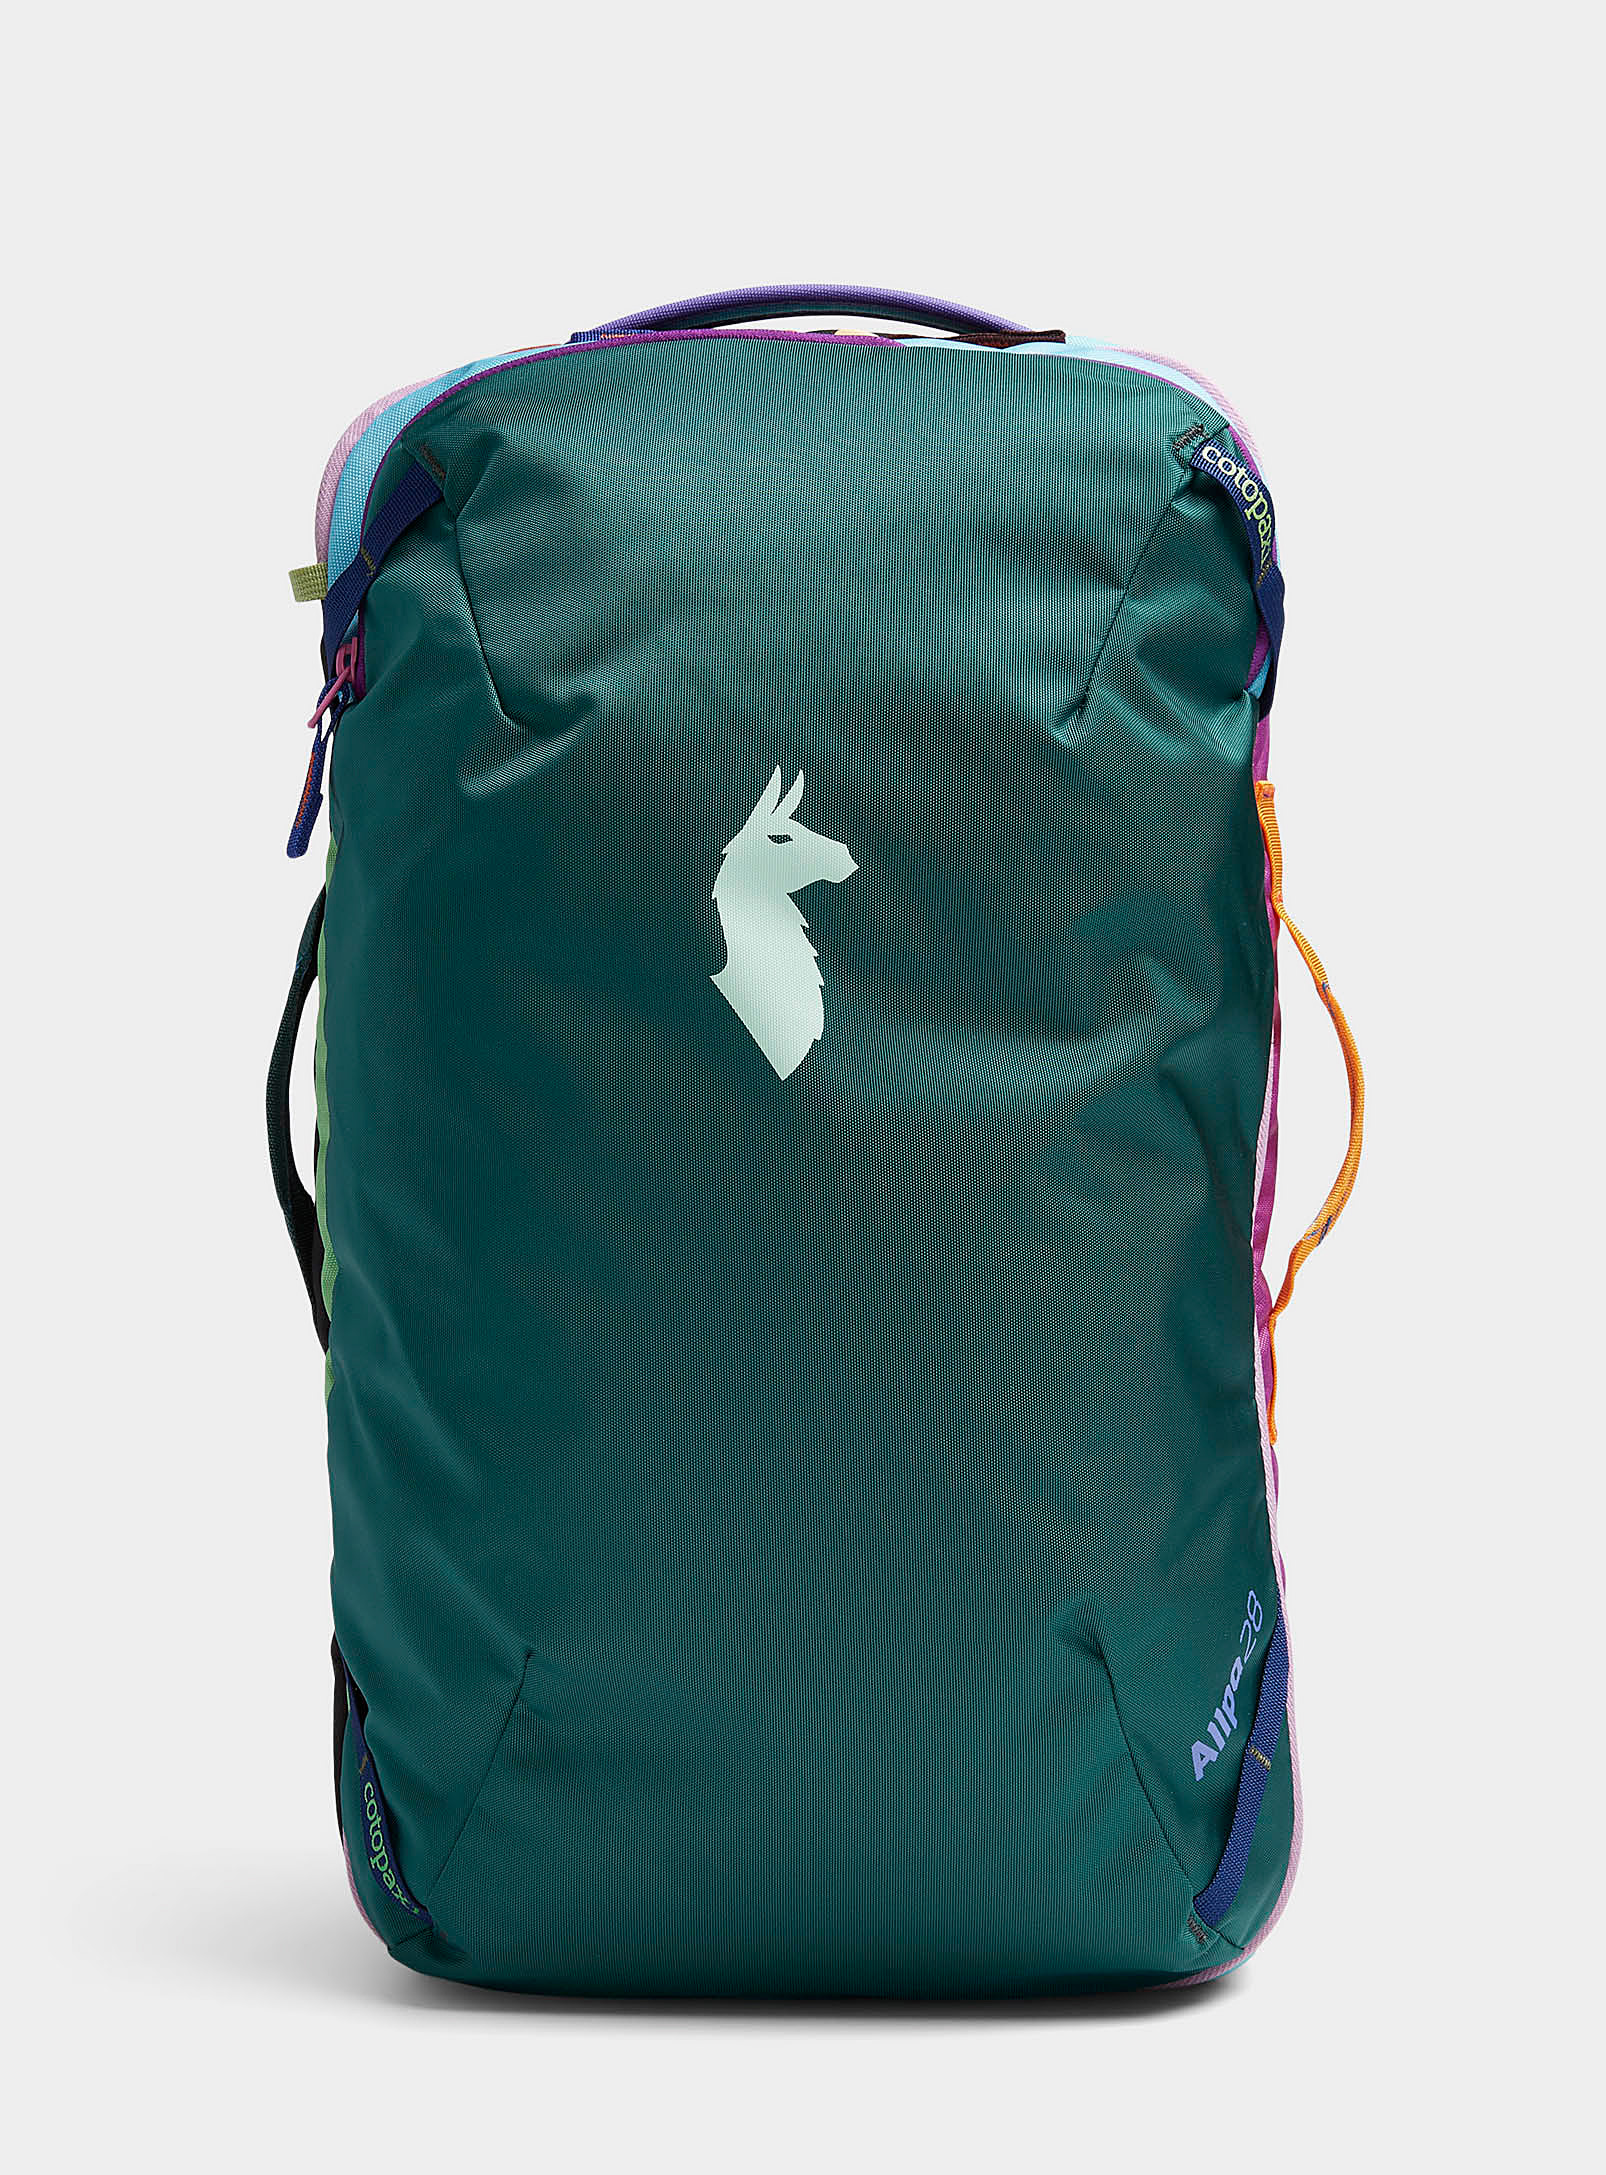 Cotopaxi - Women's Allpa 28L travel backpack One-of-a-kind colourways from the Del Da collection